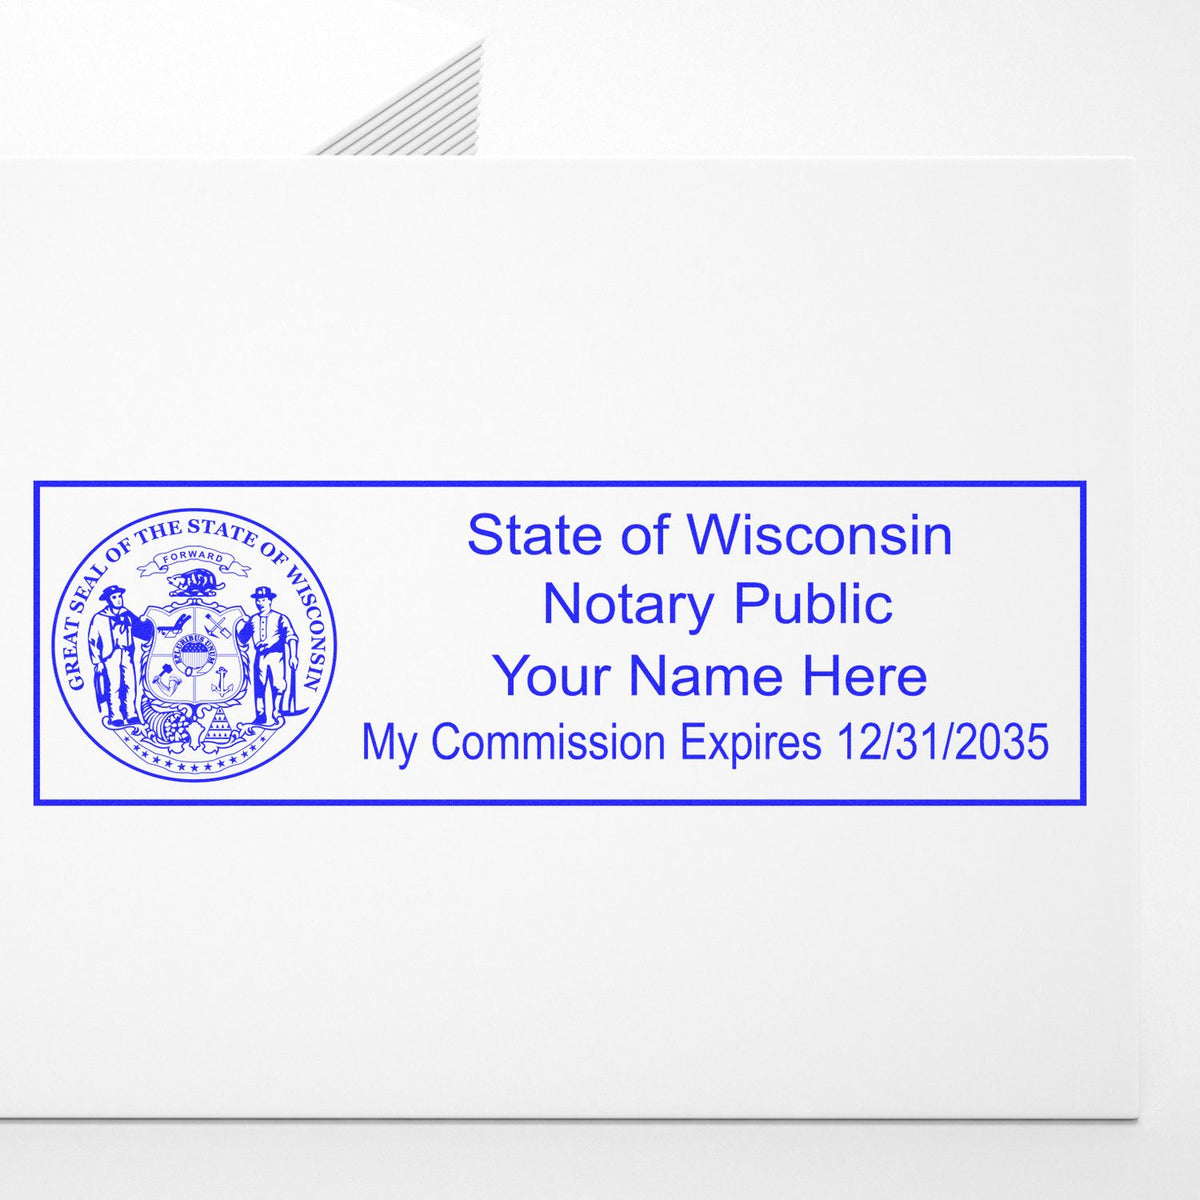 Slim Pre-Inked State Seal Notary Stamp for Wisconsin in use photo showing a stamped imprint of the Slim Pre-Inked State Seal Notary Stamp for Wisconsin